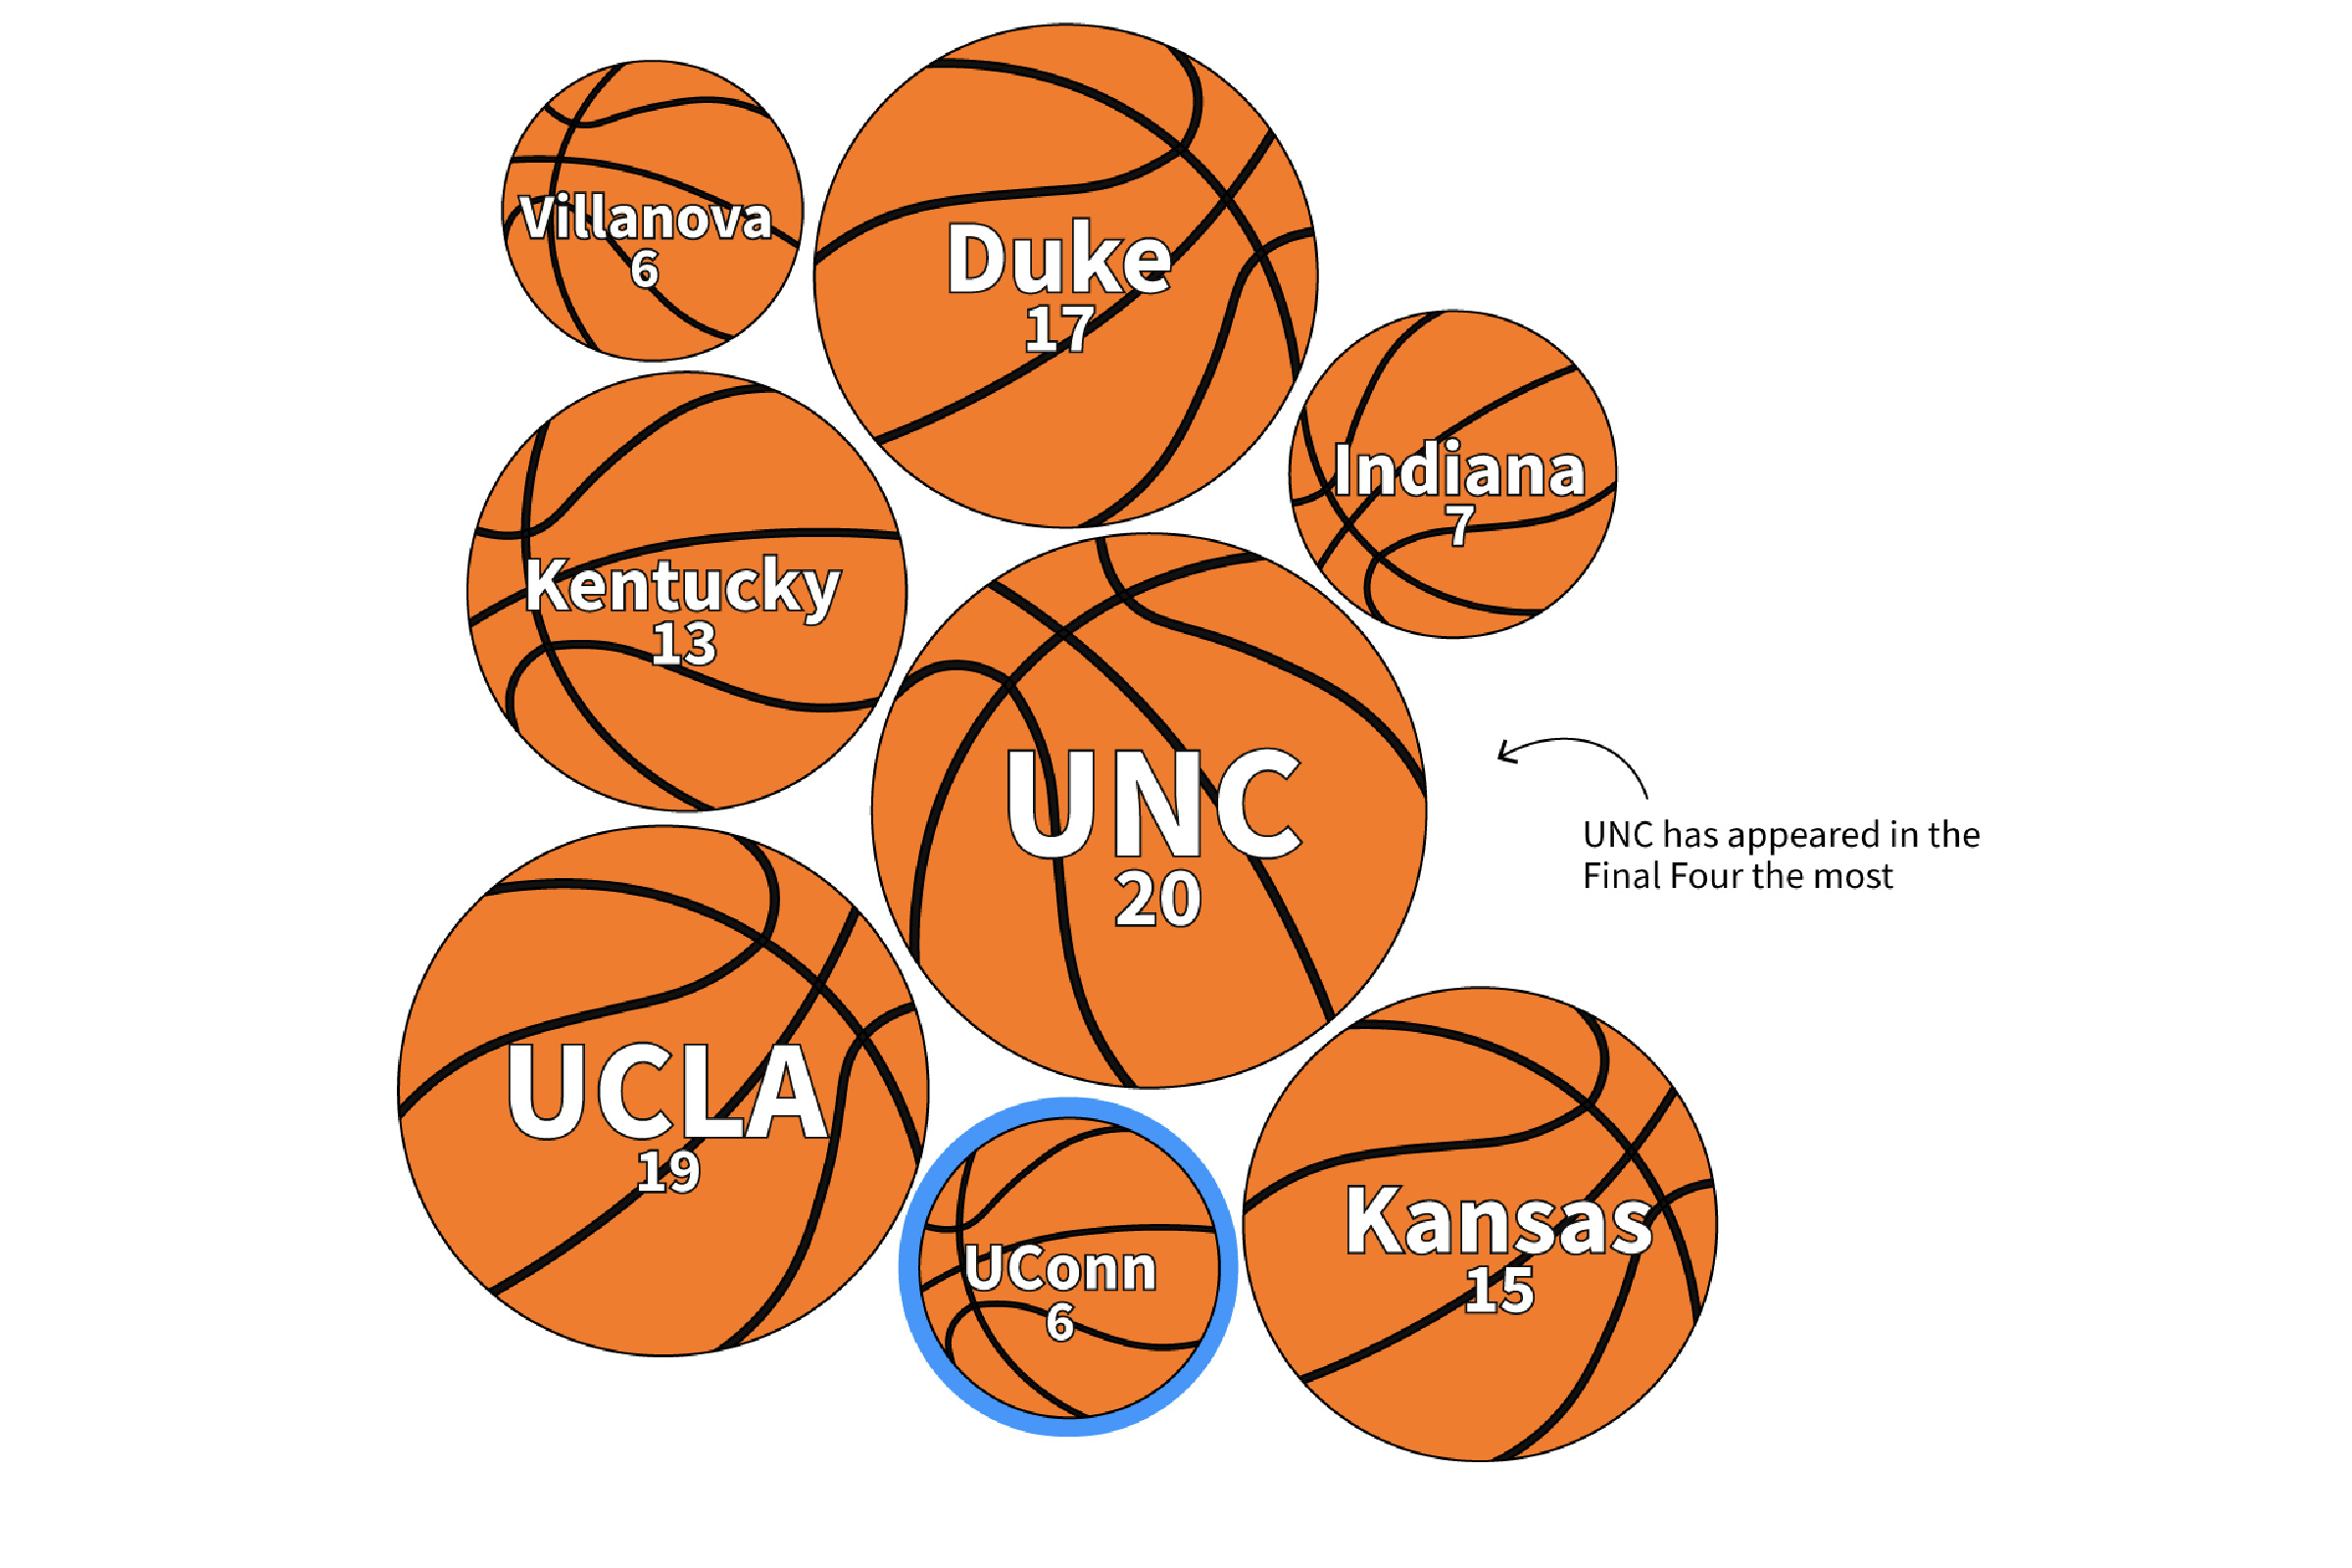 Packed circle chart showing how many Final Four appearances of Blue Blood programs.